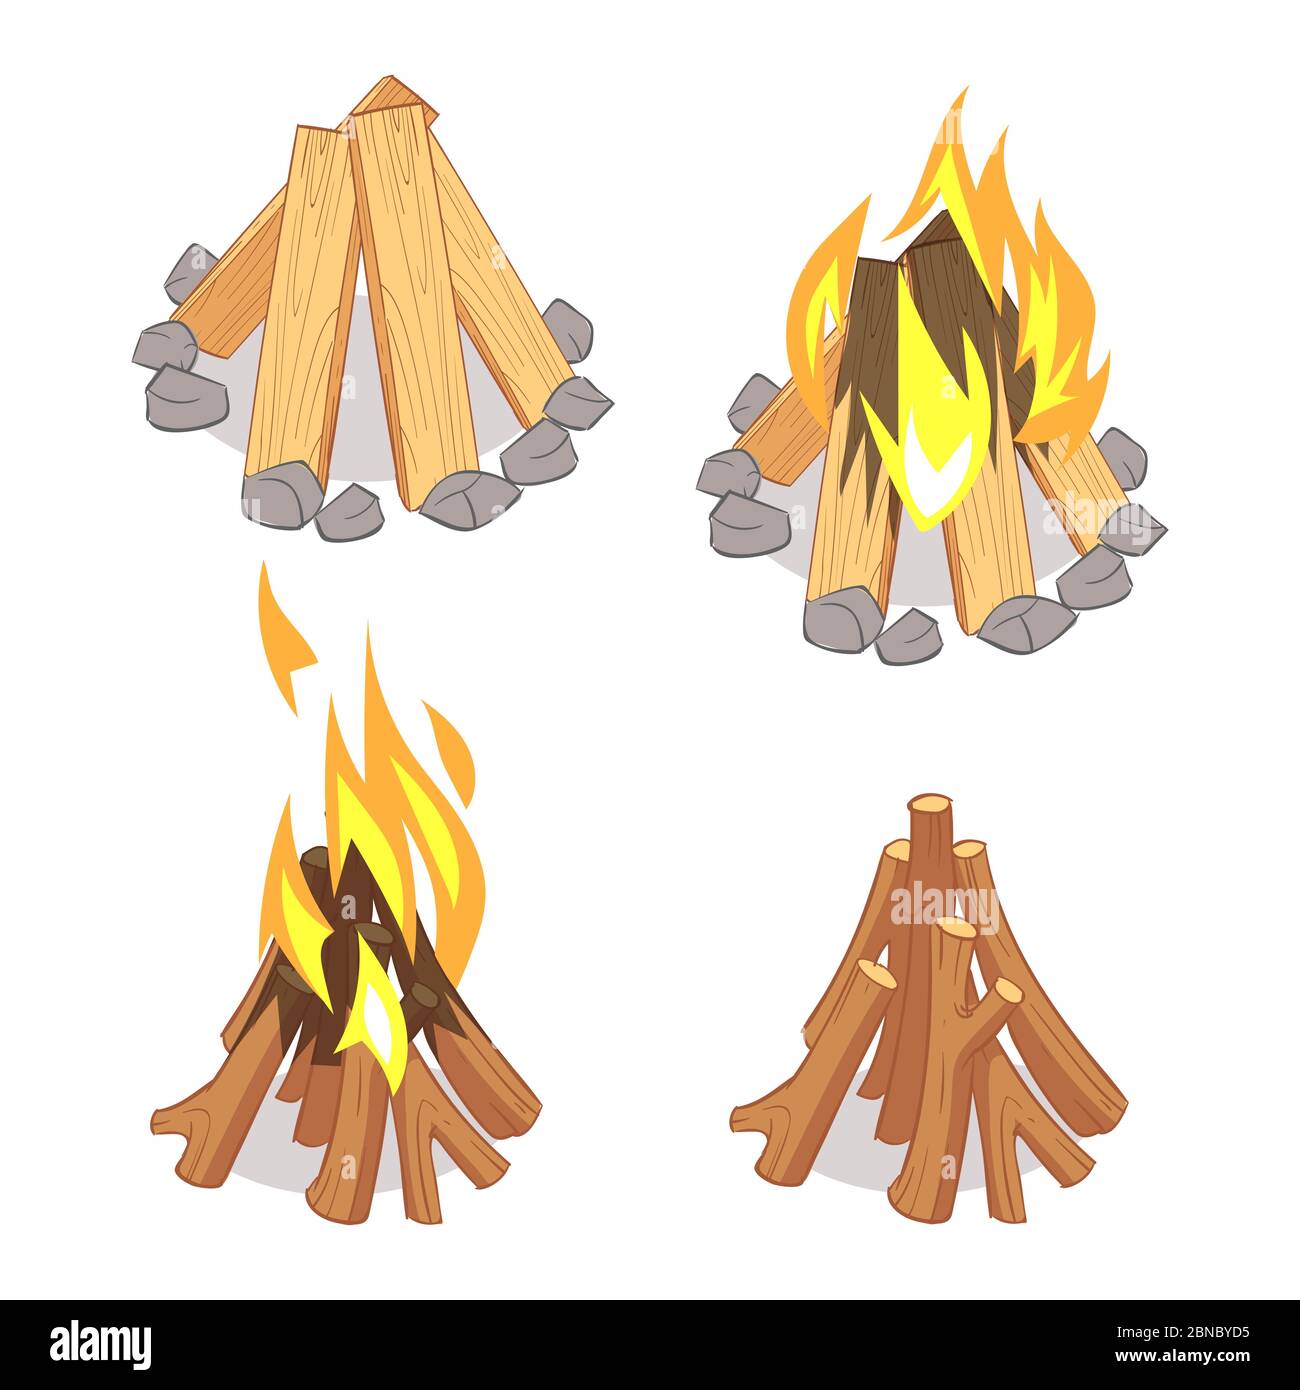 Cartoon character wooden logs and campfire isolated on white background. Illustration of campfire and firewood, camping bonfire Stock Vector